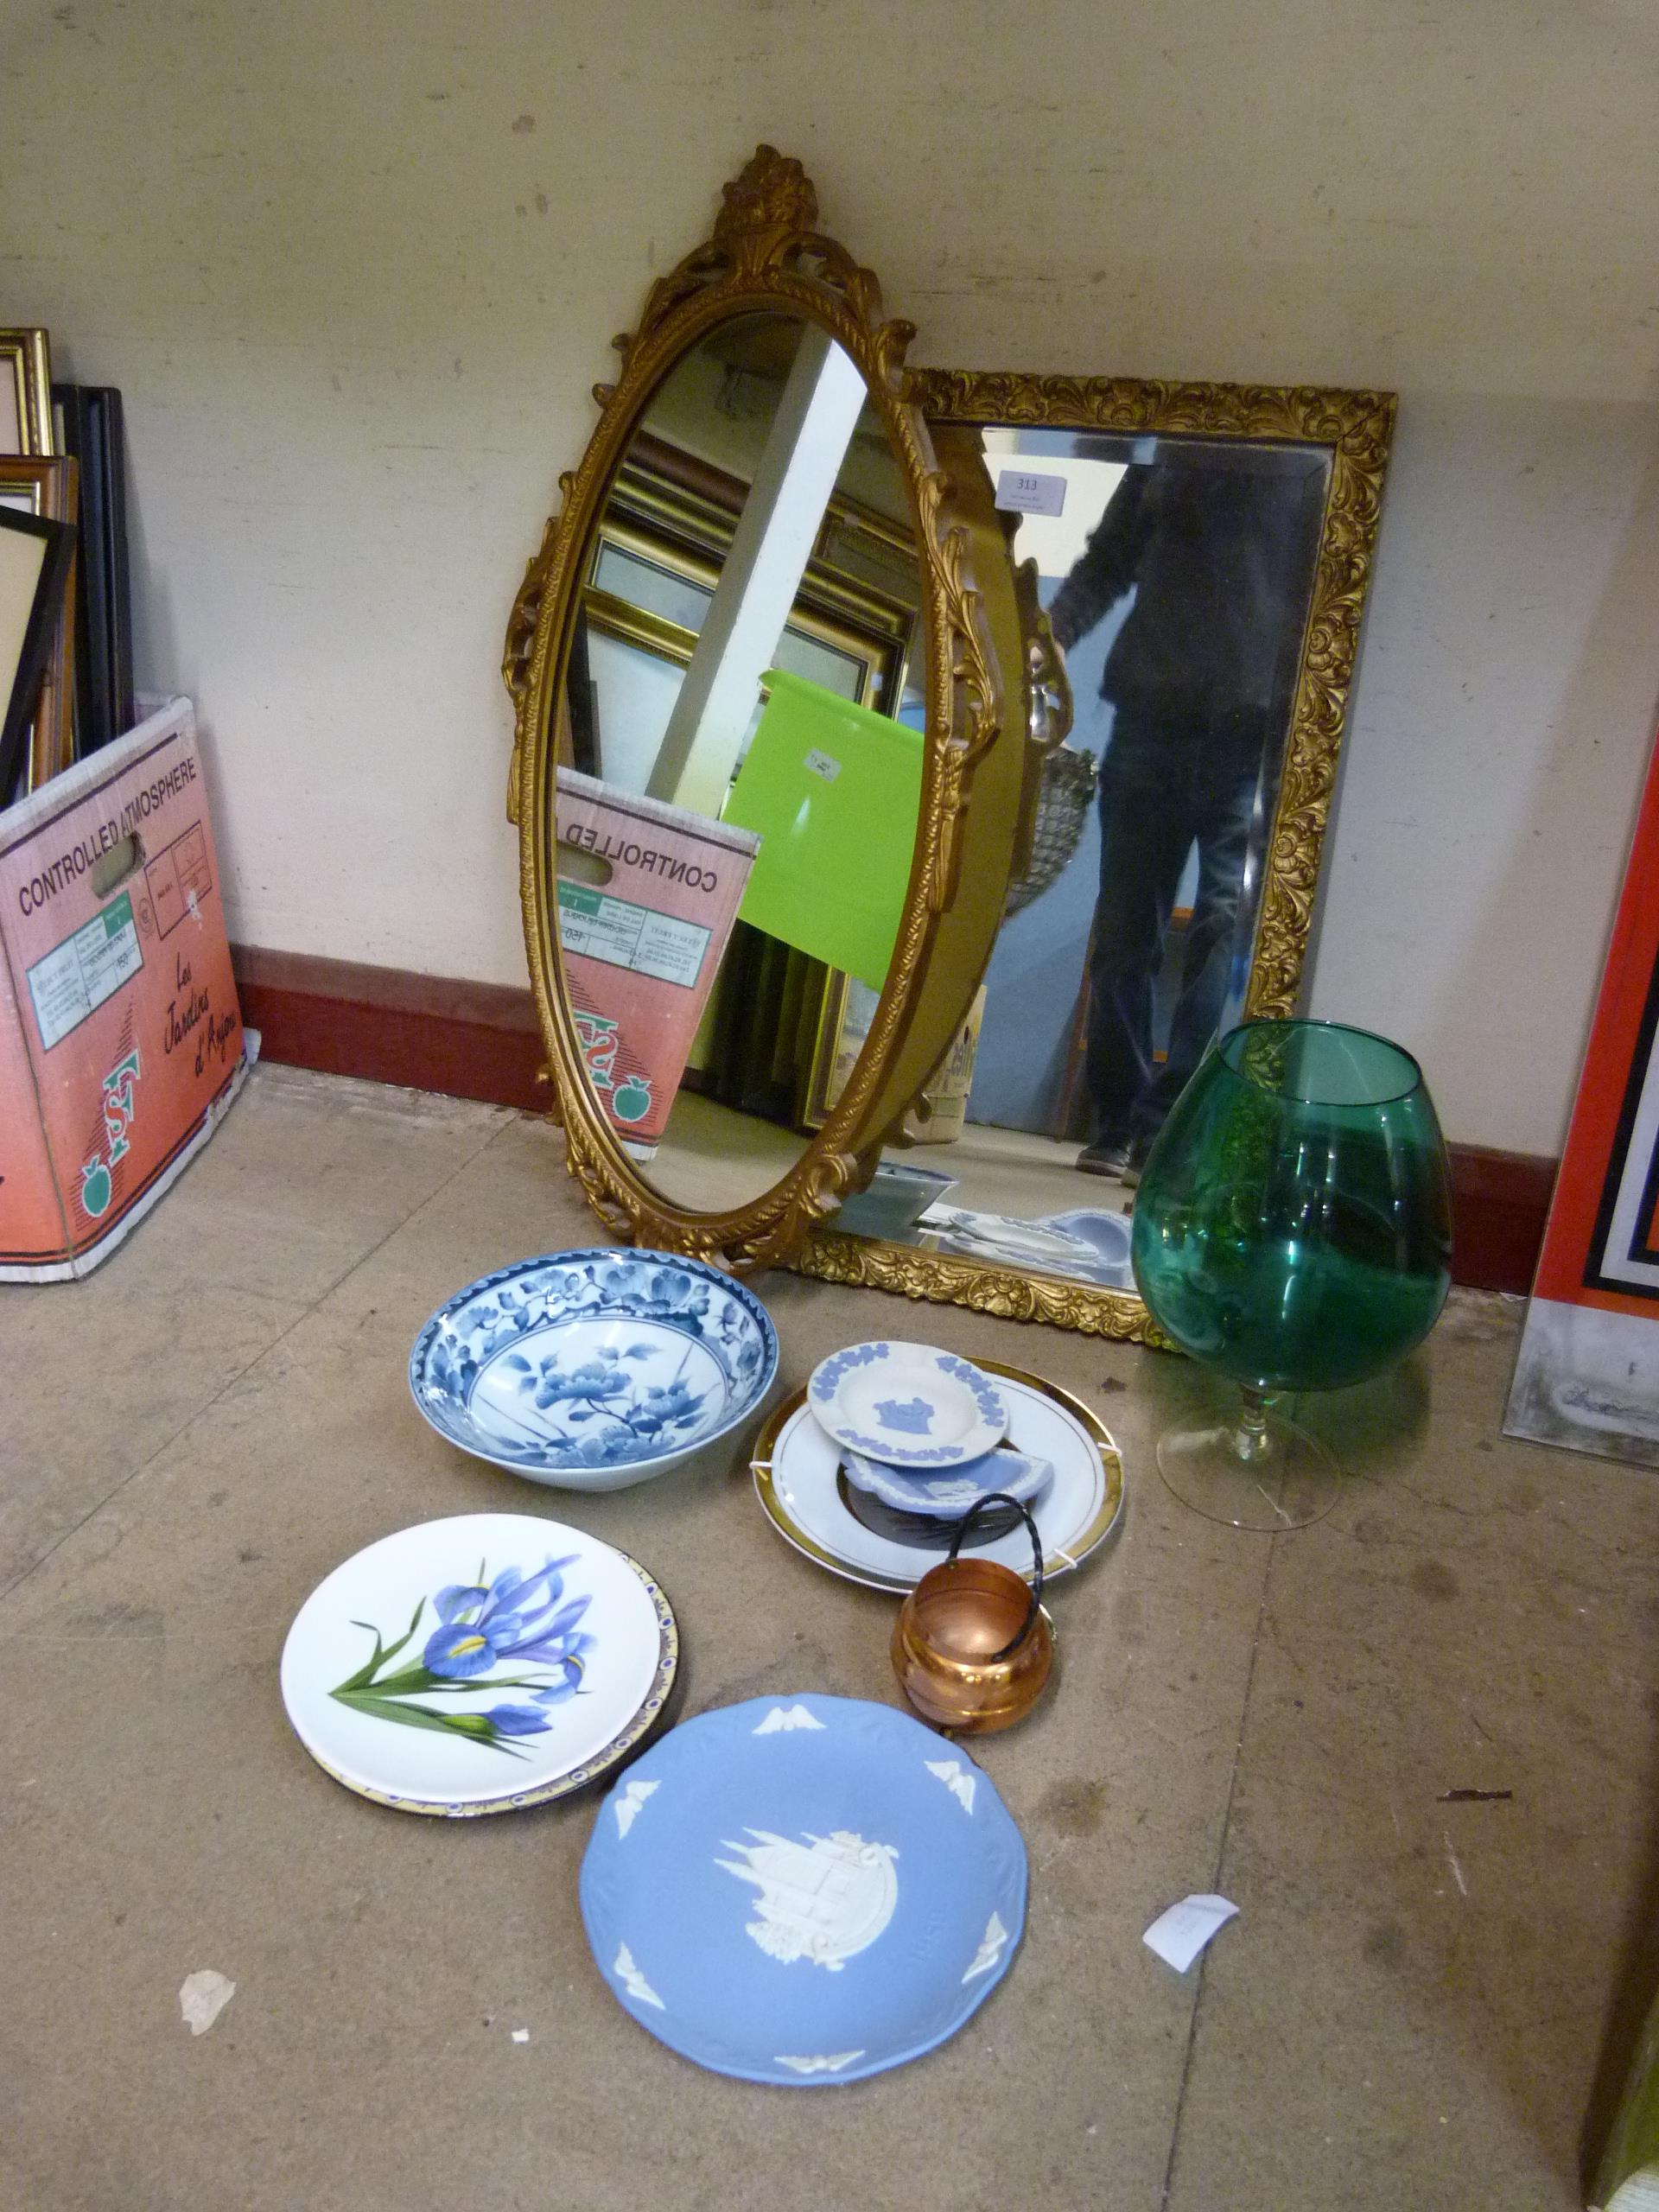 Two gilt wooden framed mirrors, a collection of china and a glass